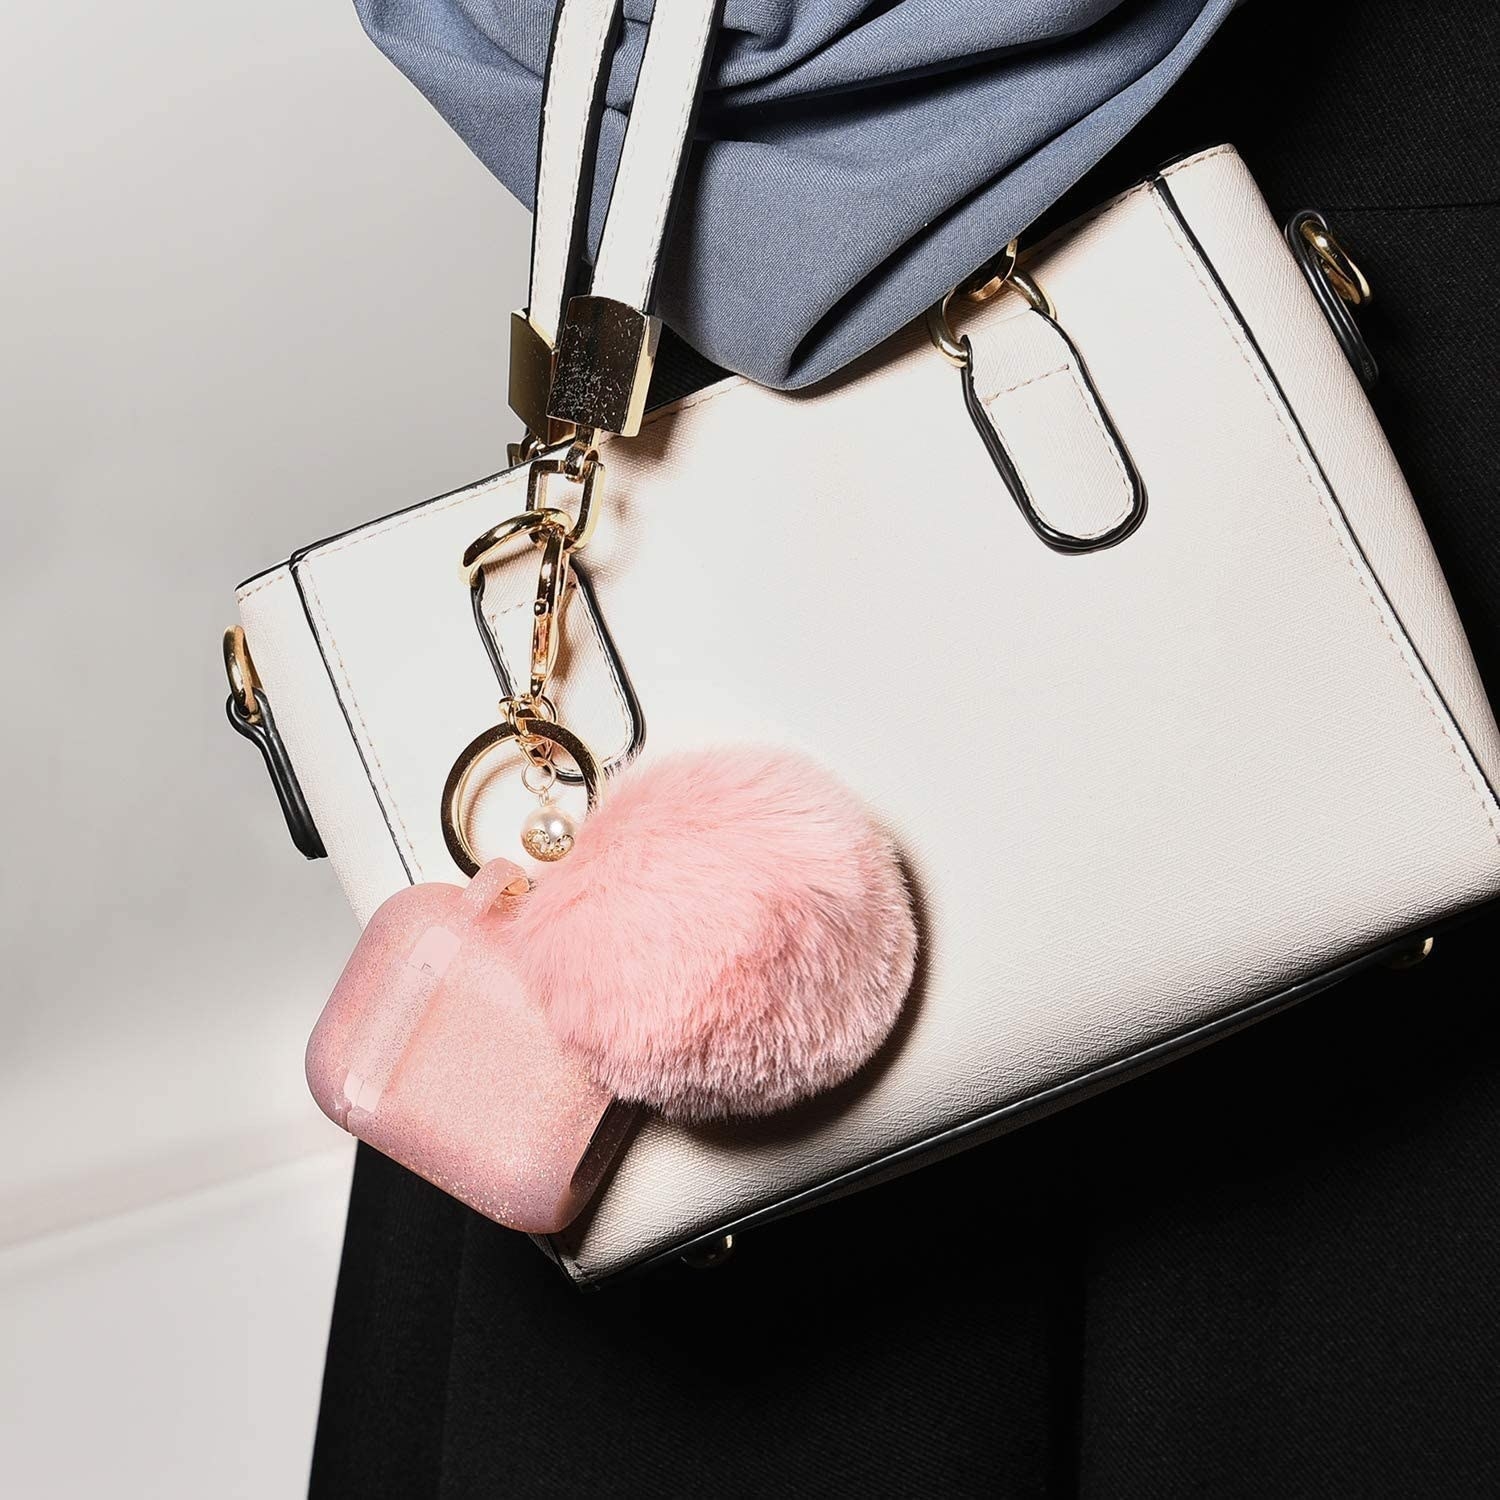 the keychain and pompom on a bag